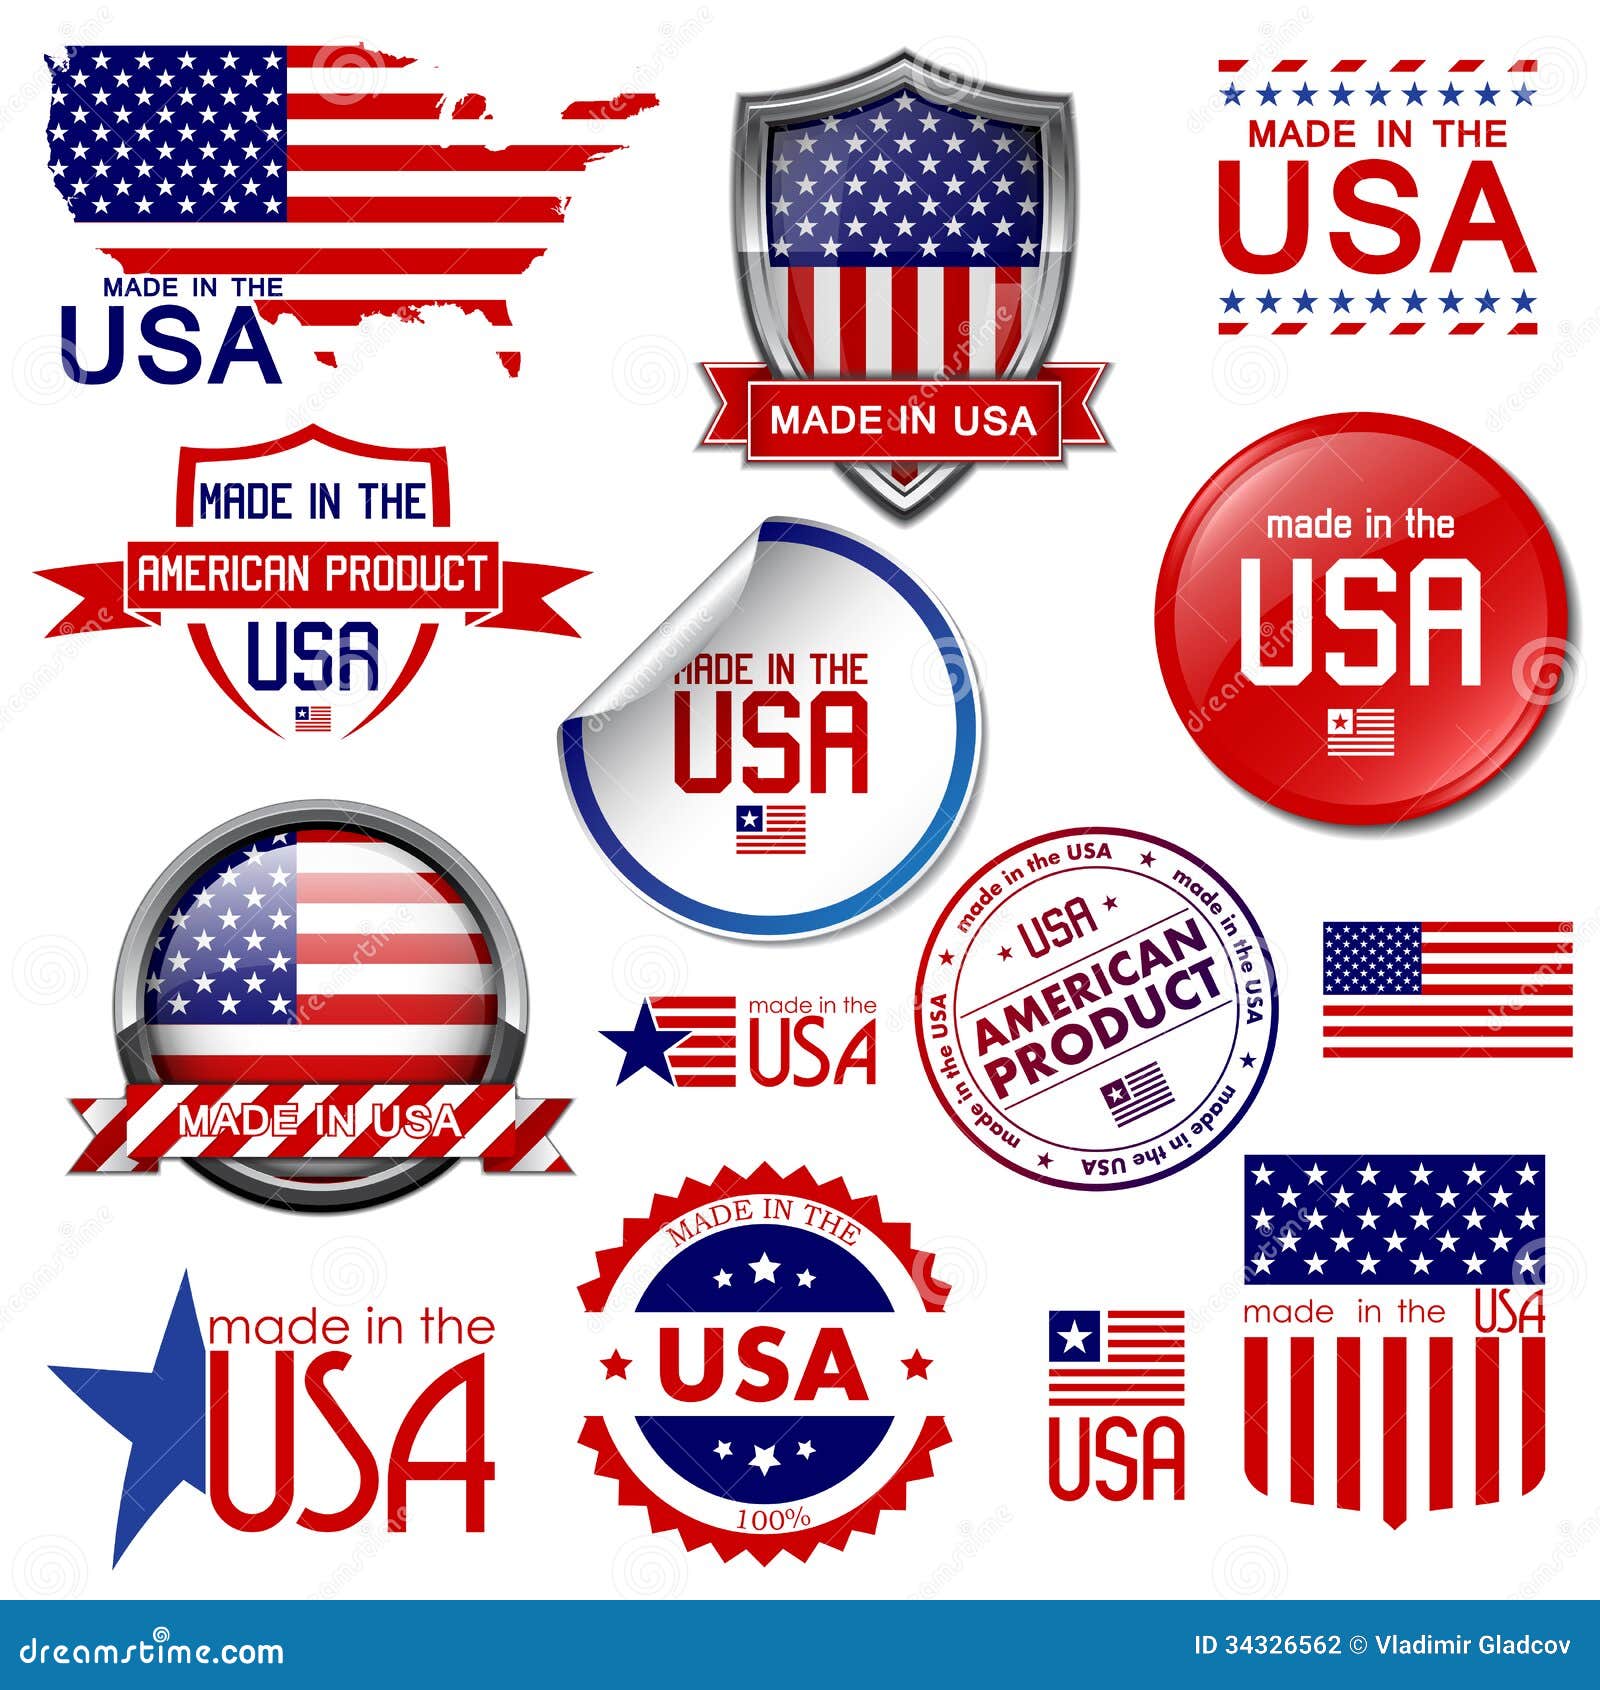 clip art made in the usa - photo #18